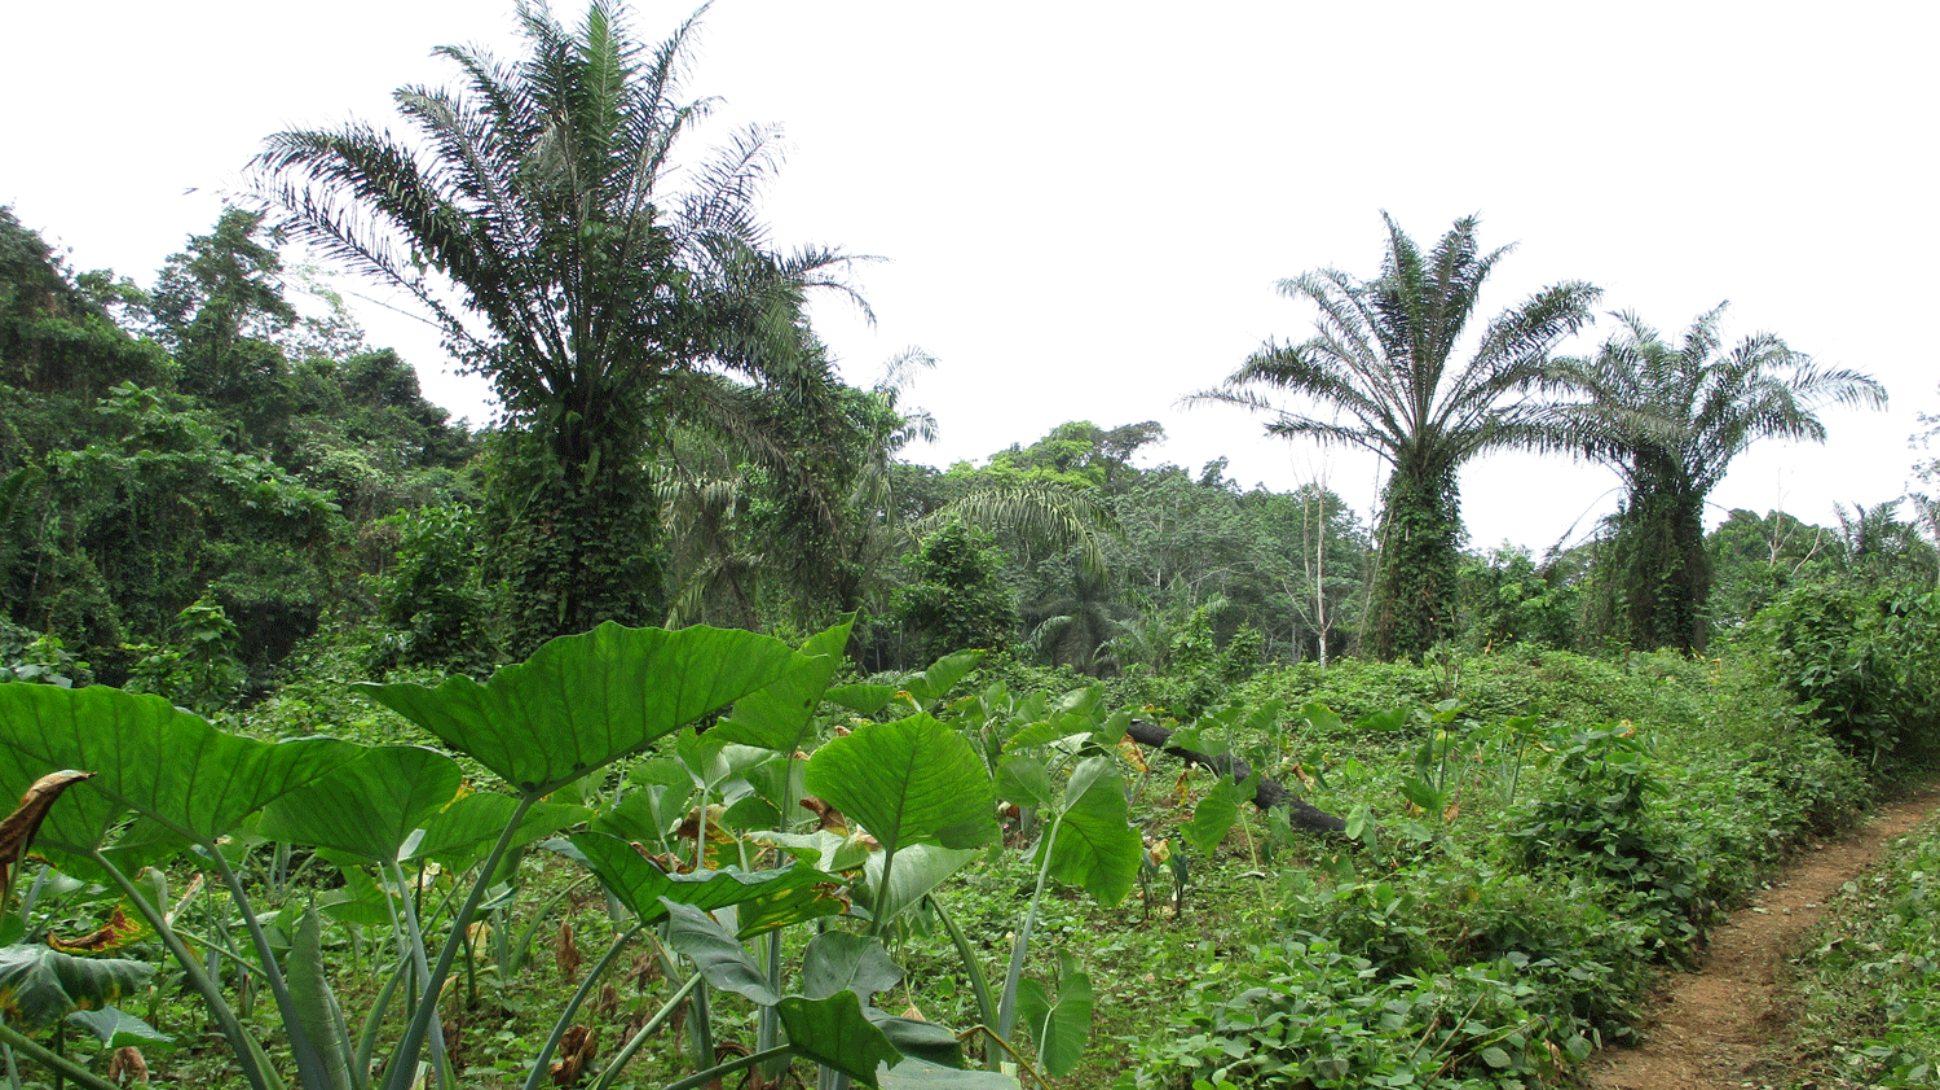 Green shrubs and three big trees in Ebo forest